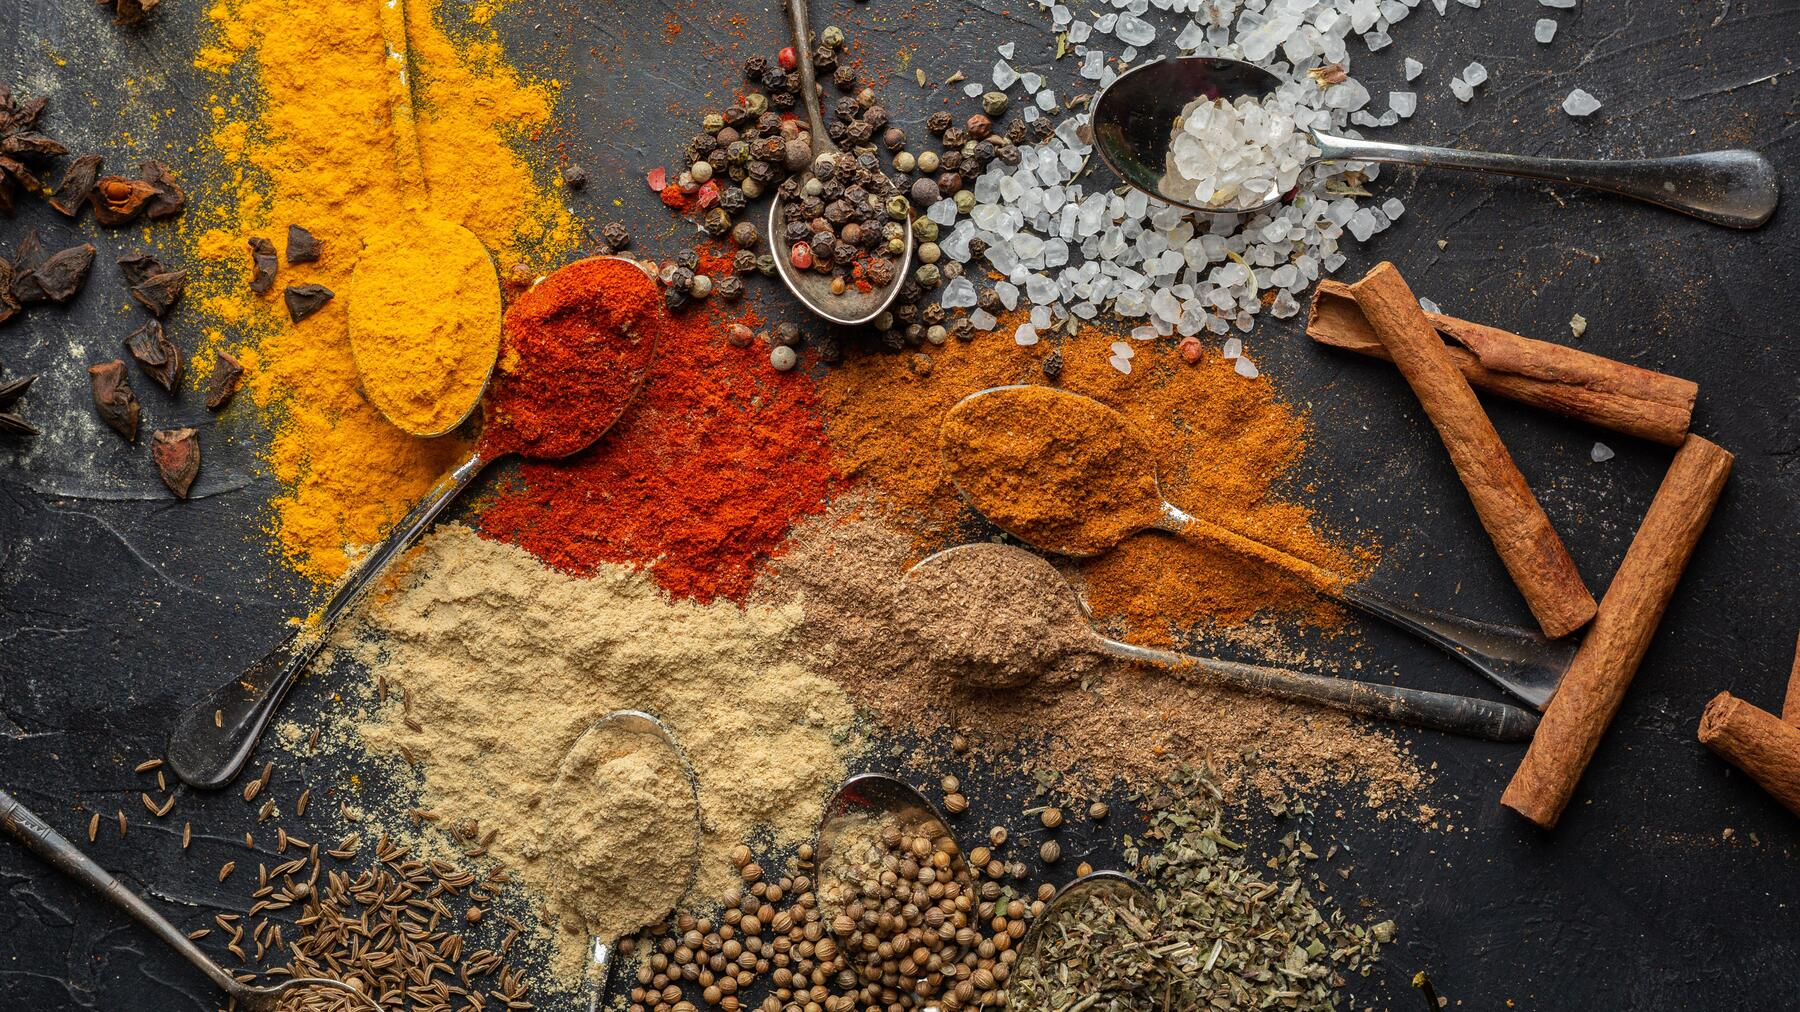 Curry spices: A colourful array of spices including turmeric, cumin, coriander, and chili powder.